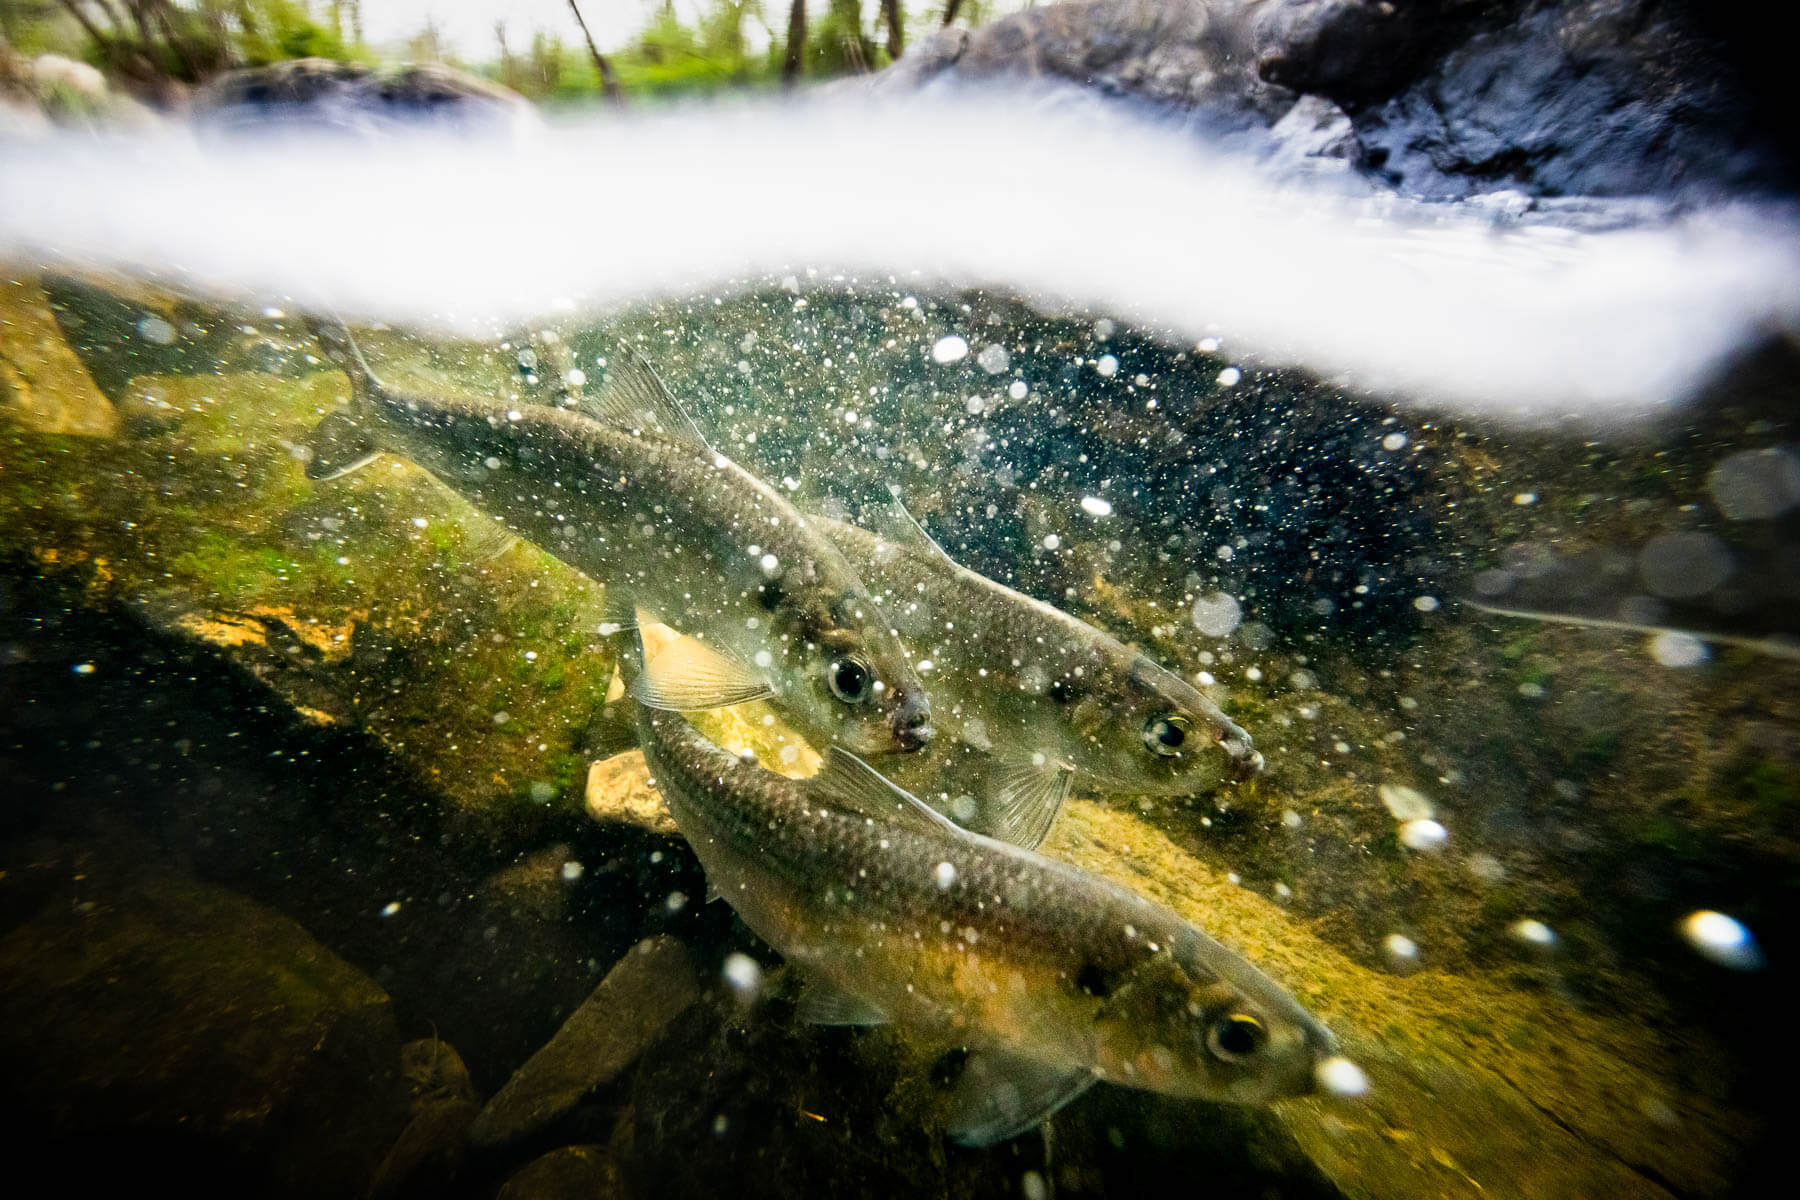 Fish swim in a healthy river in the Chesapeake Bay watershed.